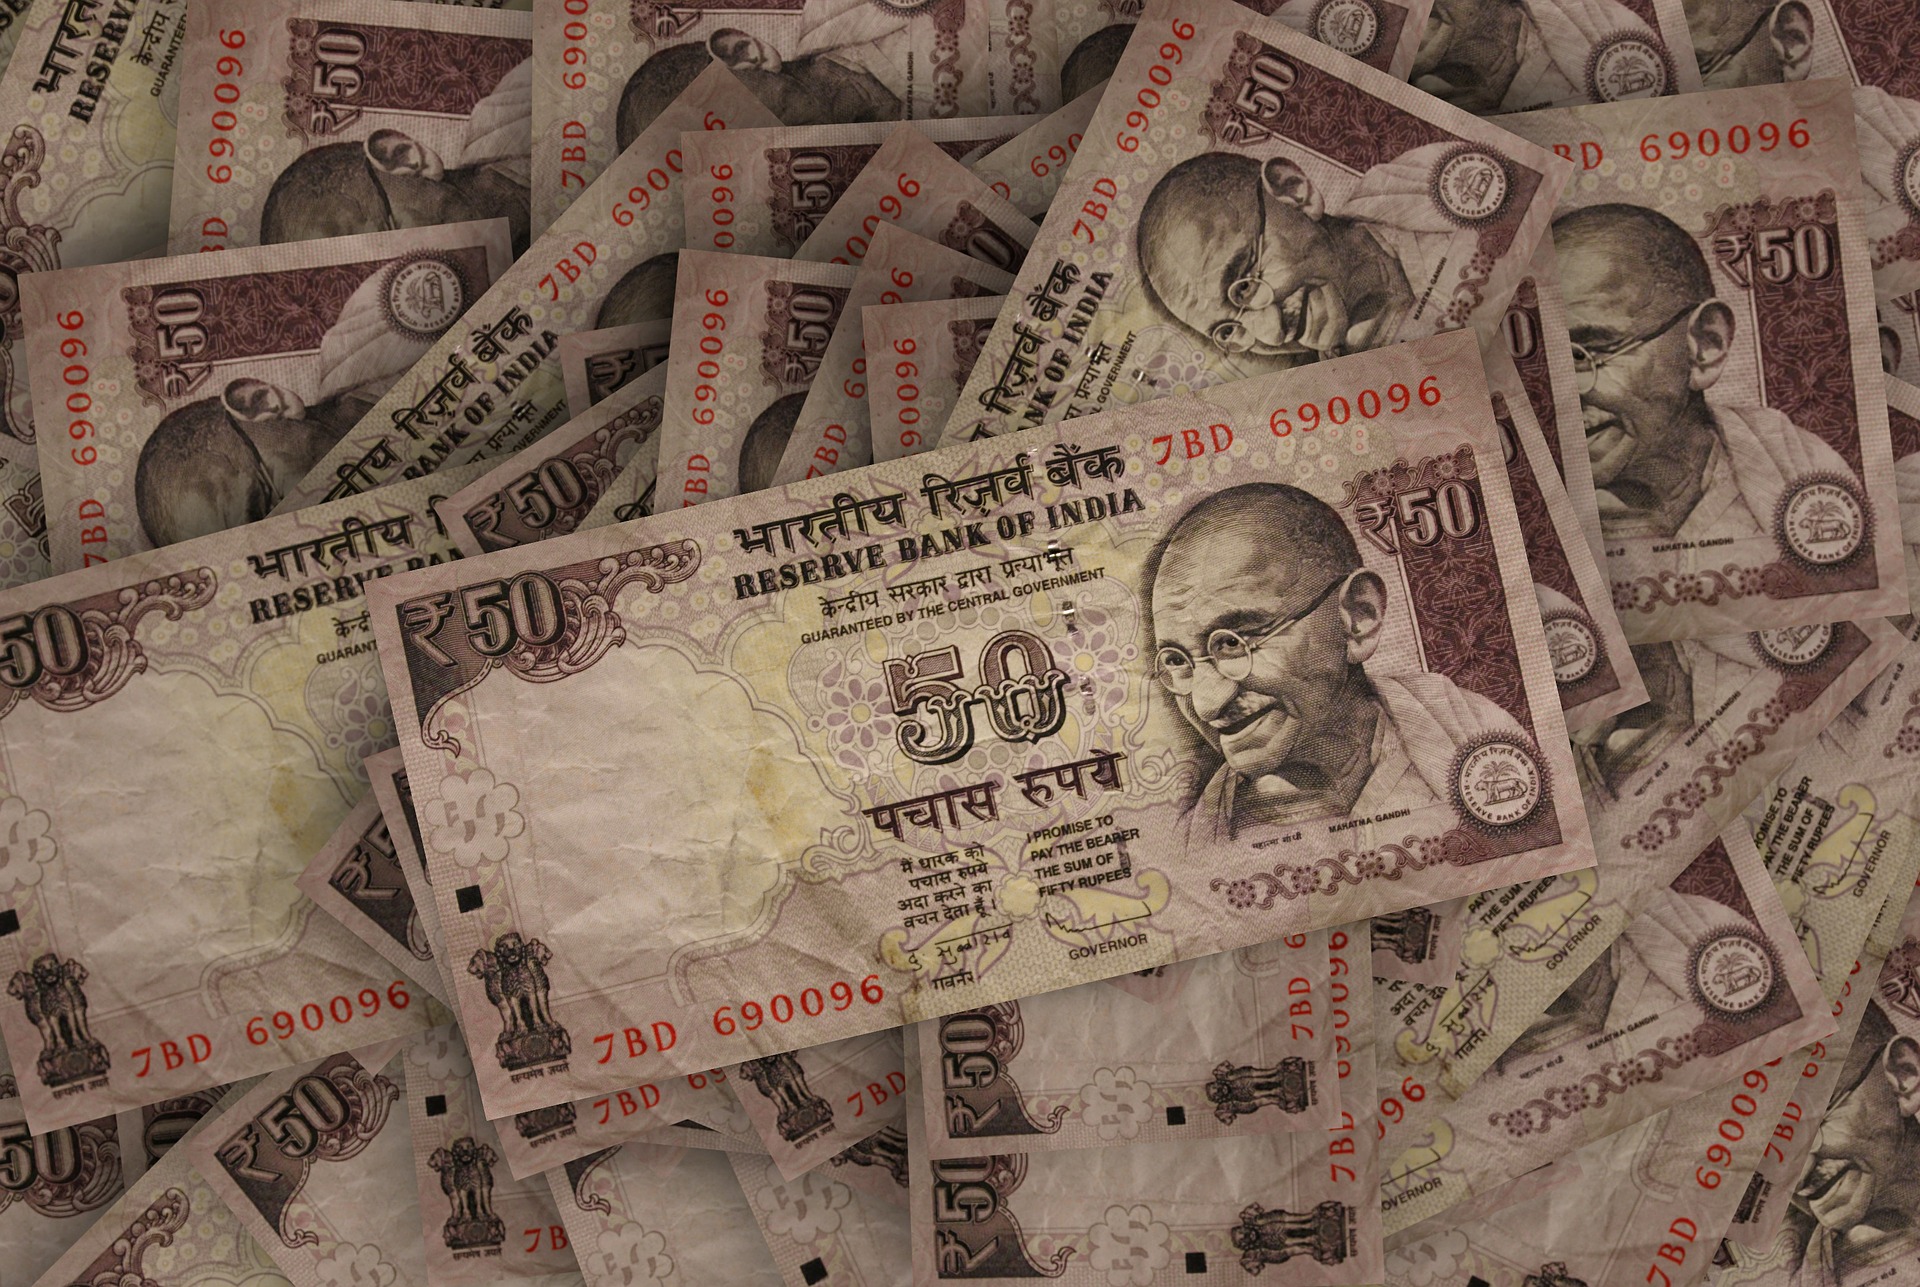 India’s financial authorities are fighting to gain control of cryptocurrencies